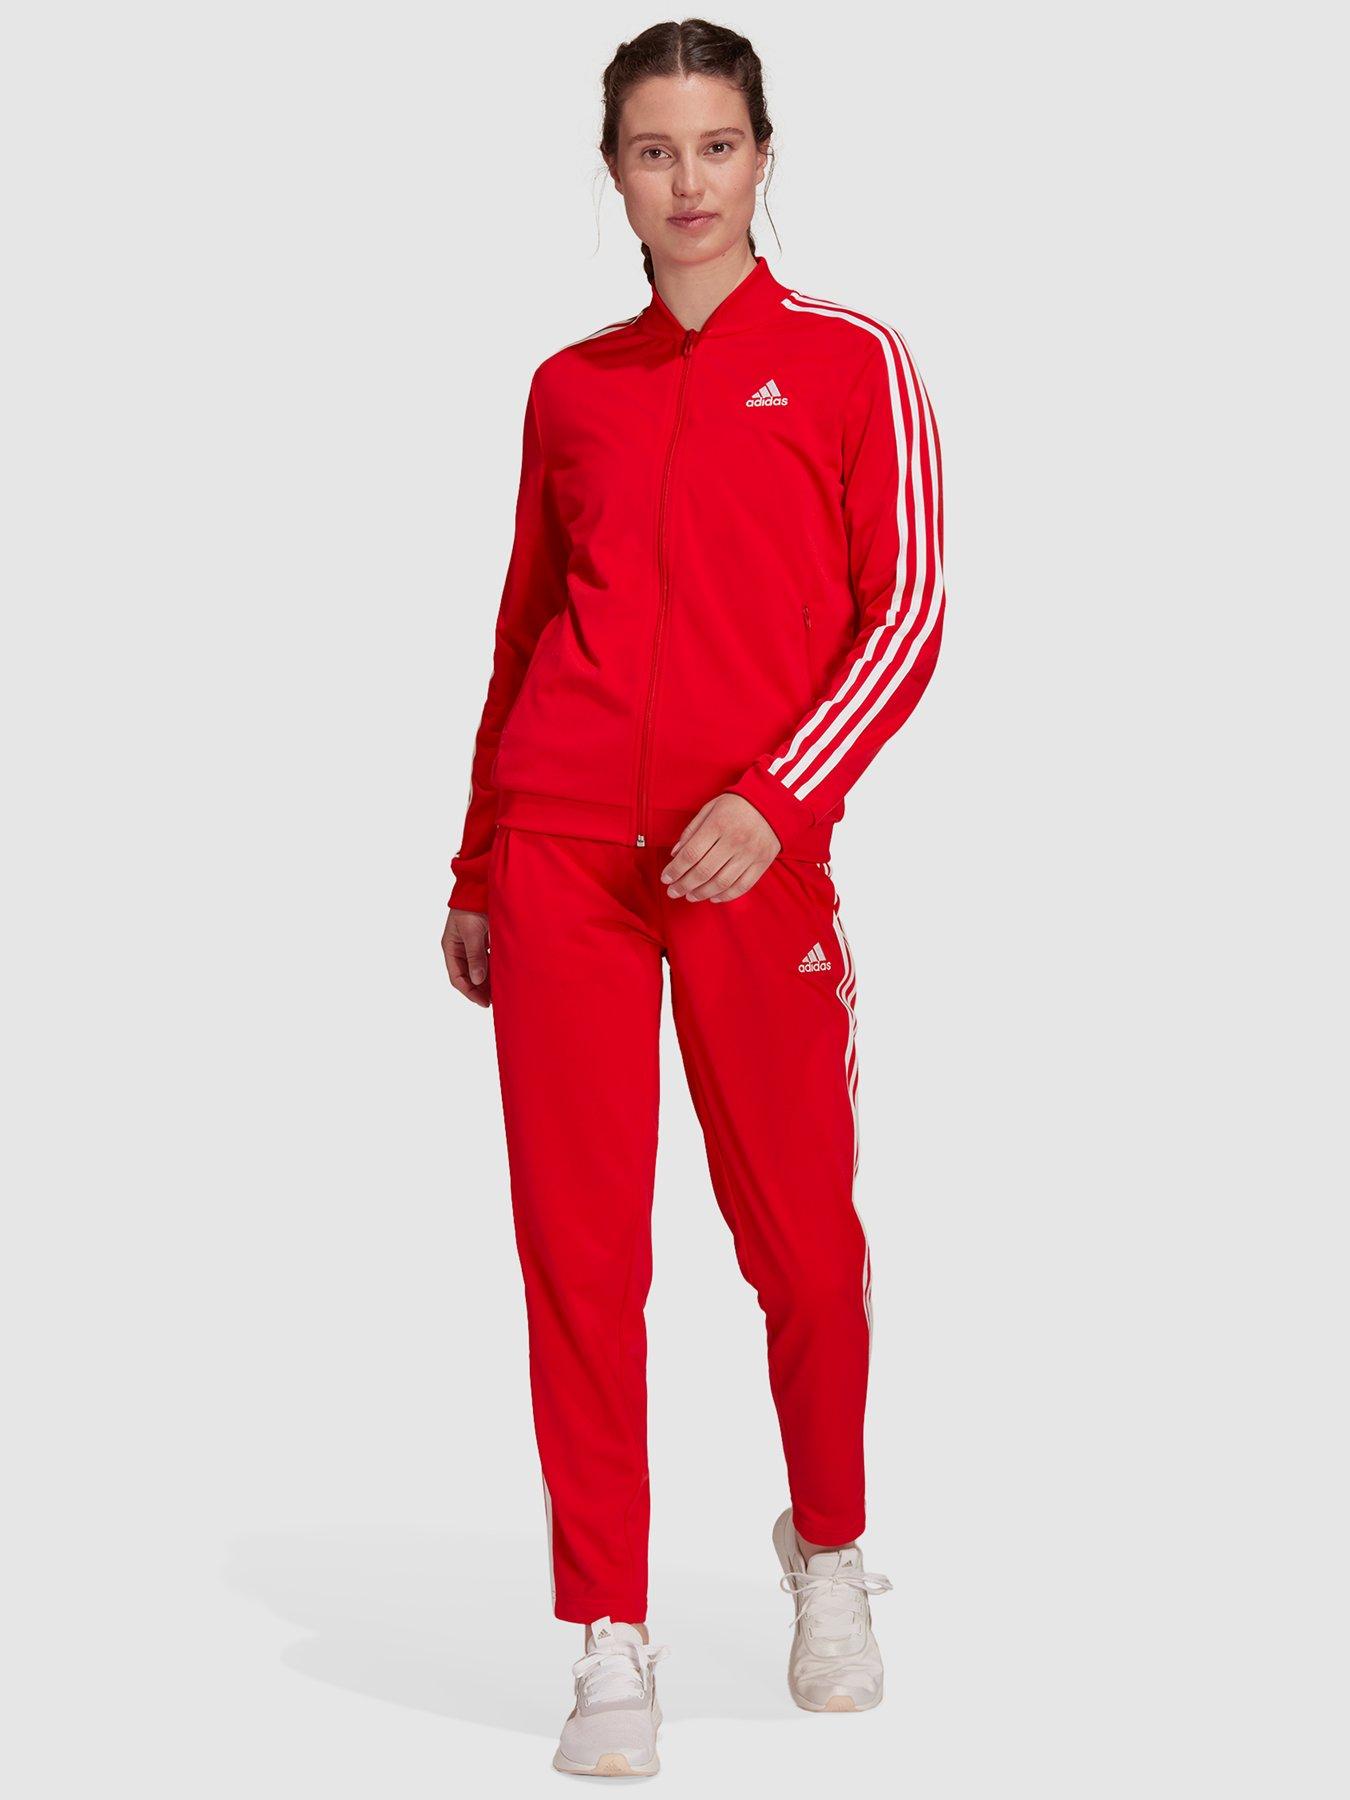  Essentials 3 Stripes Tracksuit - Red/White